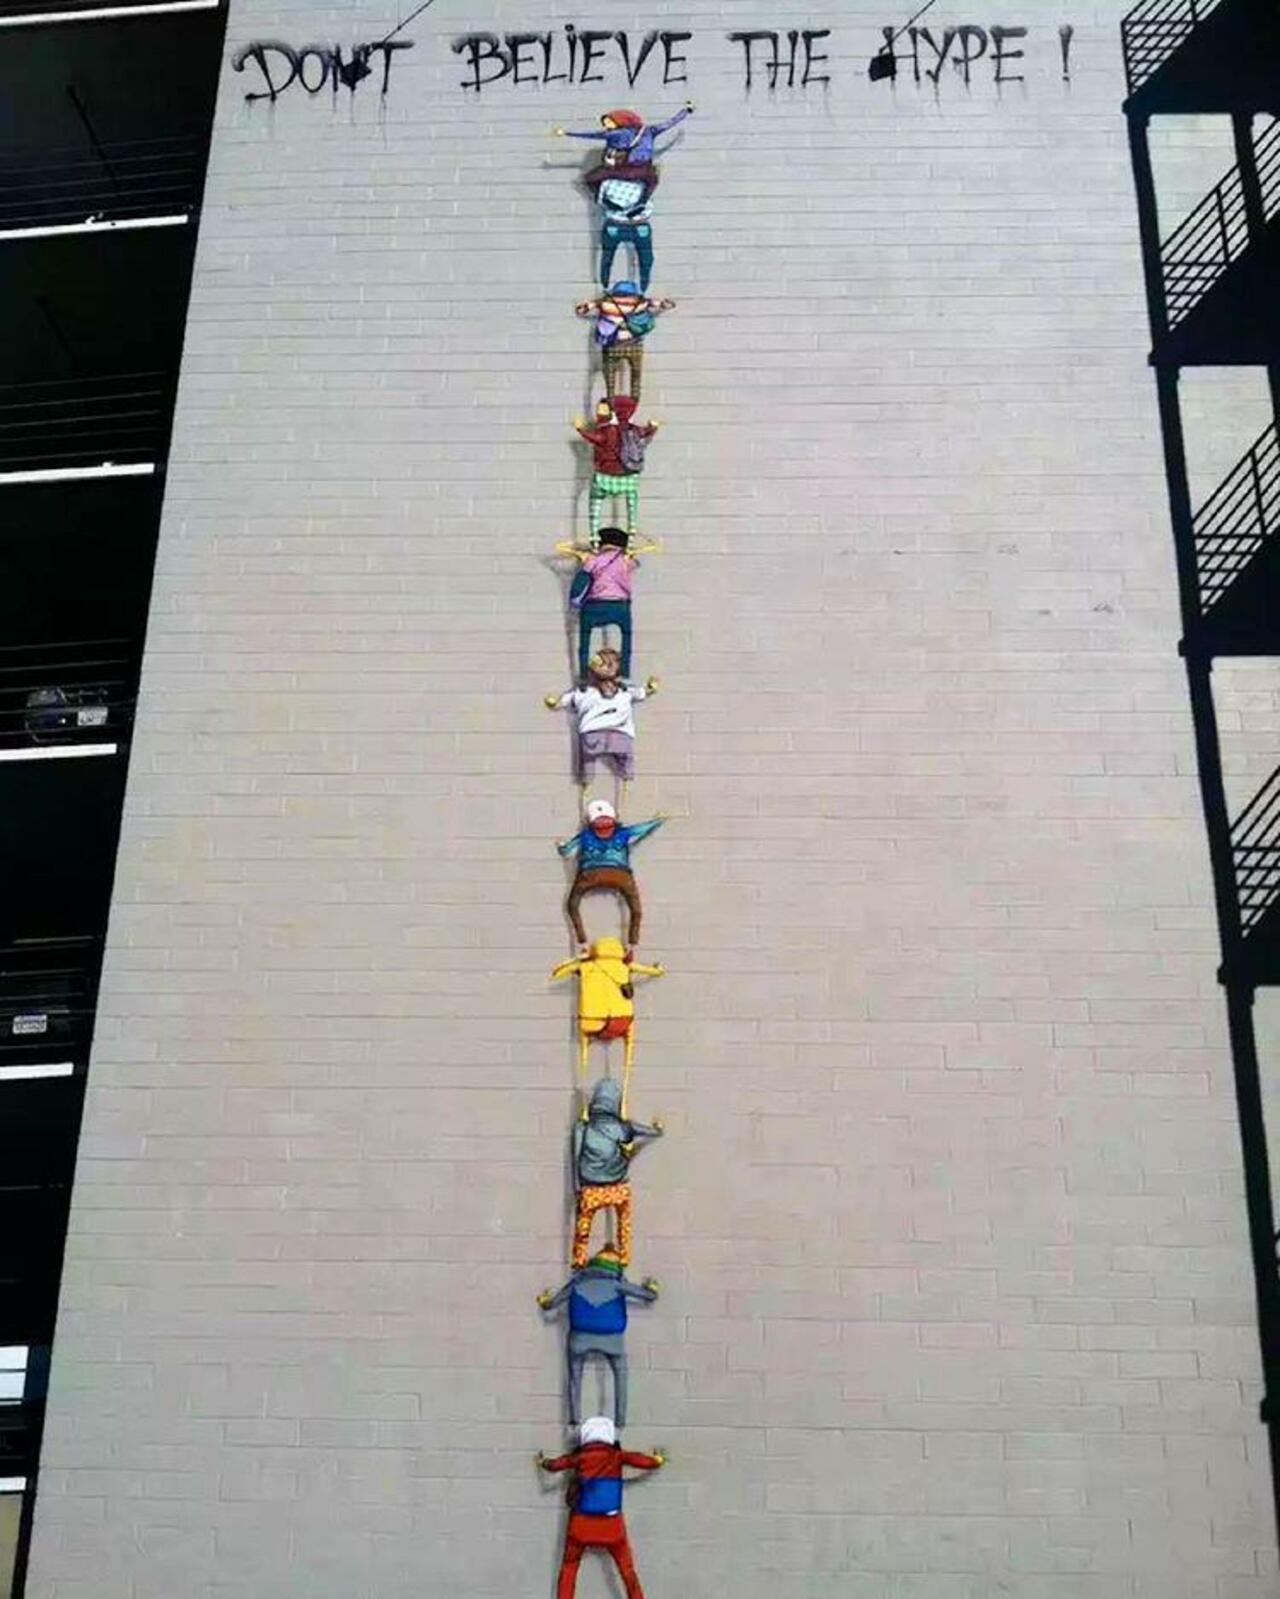 'Don't Believe The Hype', a new mural by Os Gemeos in San Diego, USA. #StreetArt #Graffiti #Mural http://t.co/BUJls2rjVy